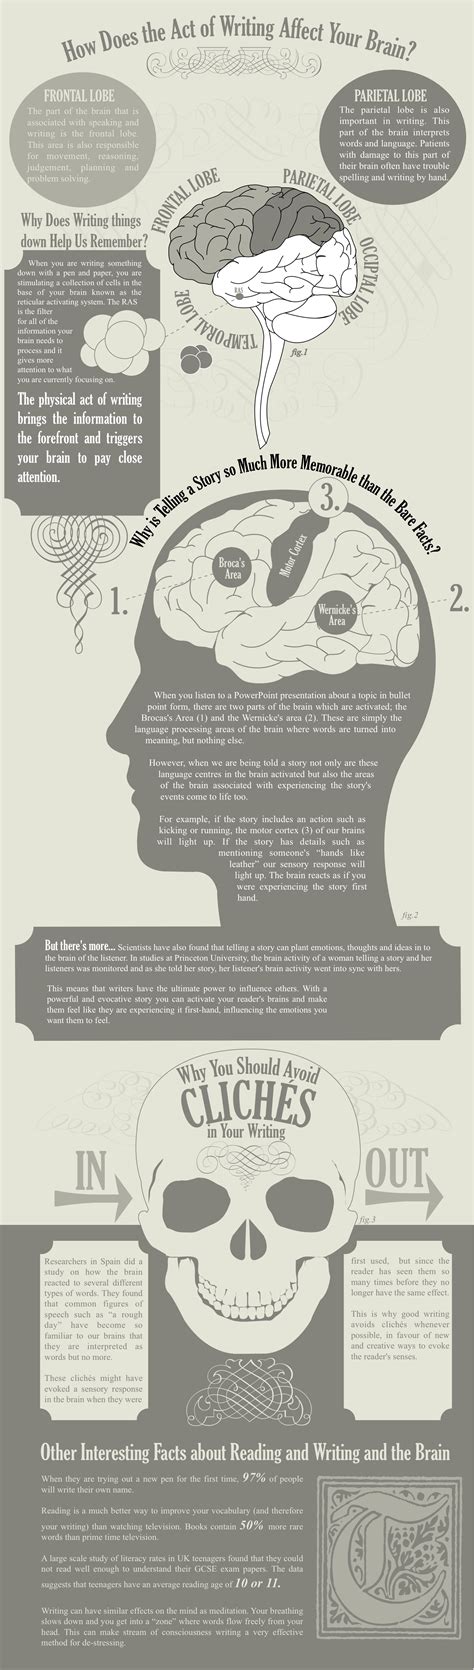 Amazing Facts on Writing and How it Affects Our Brain ...